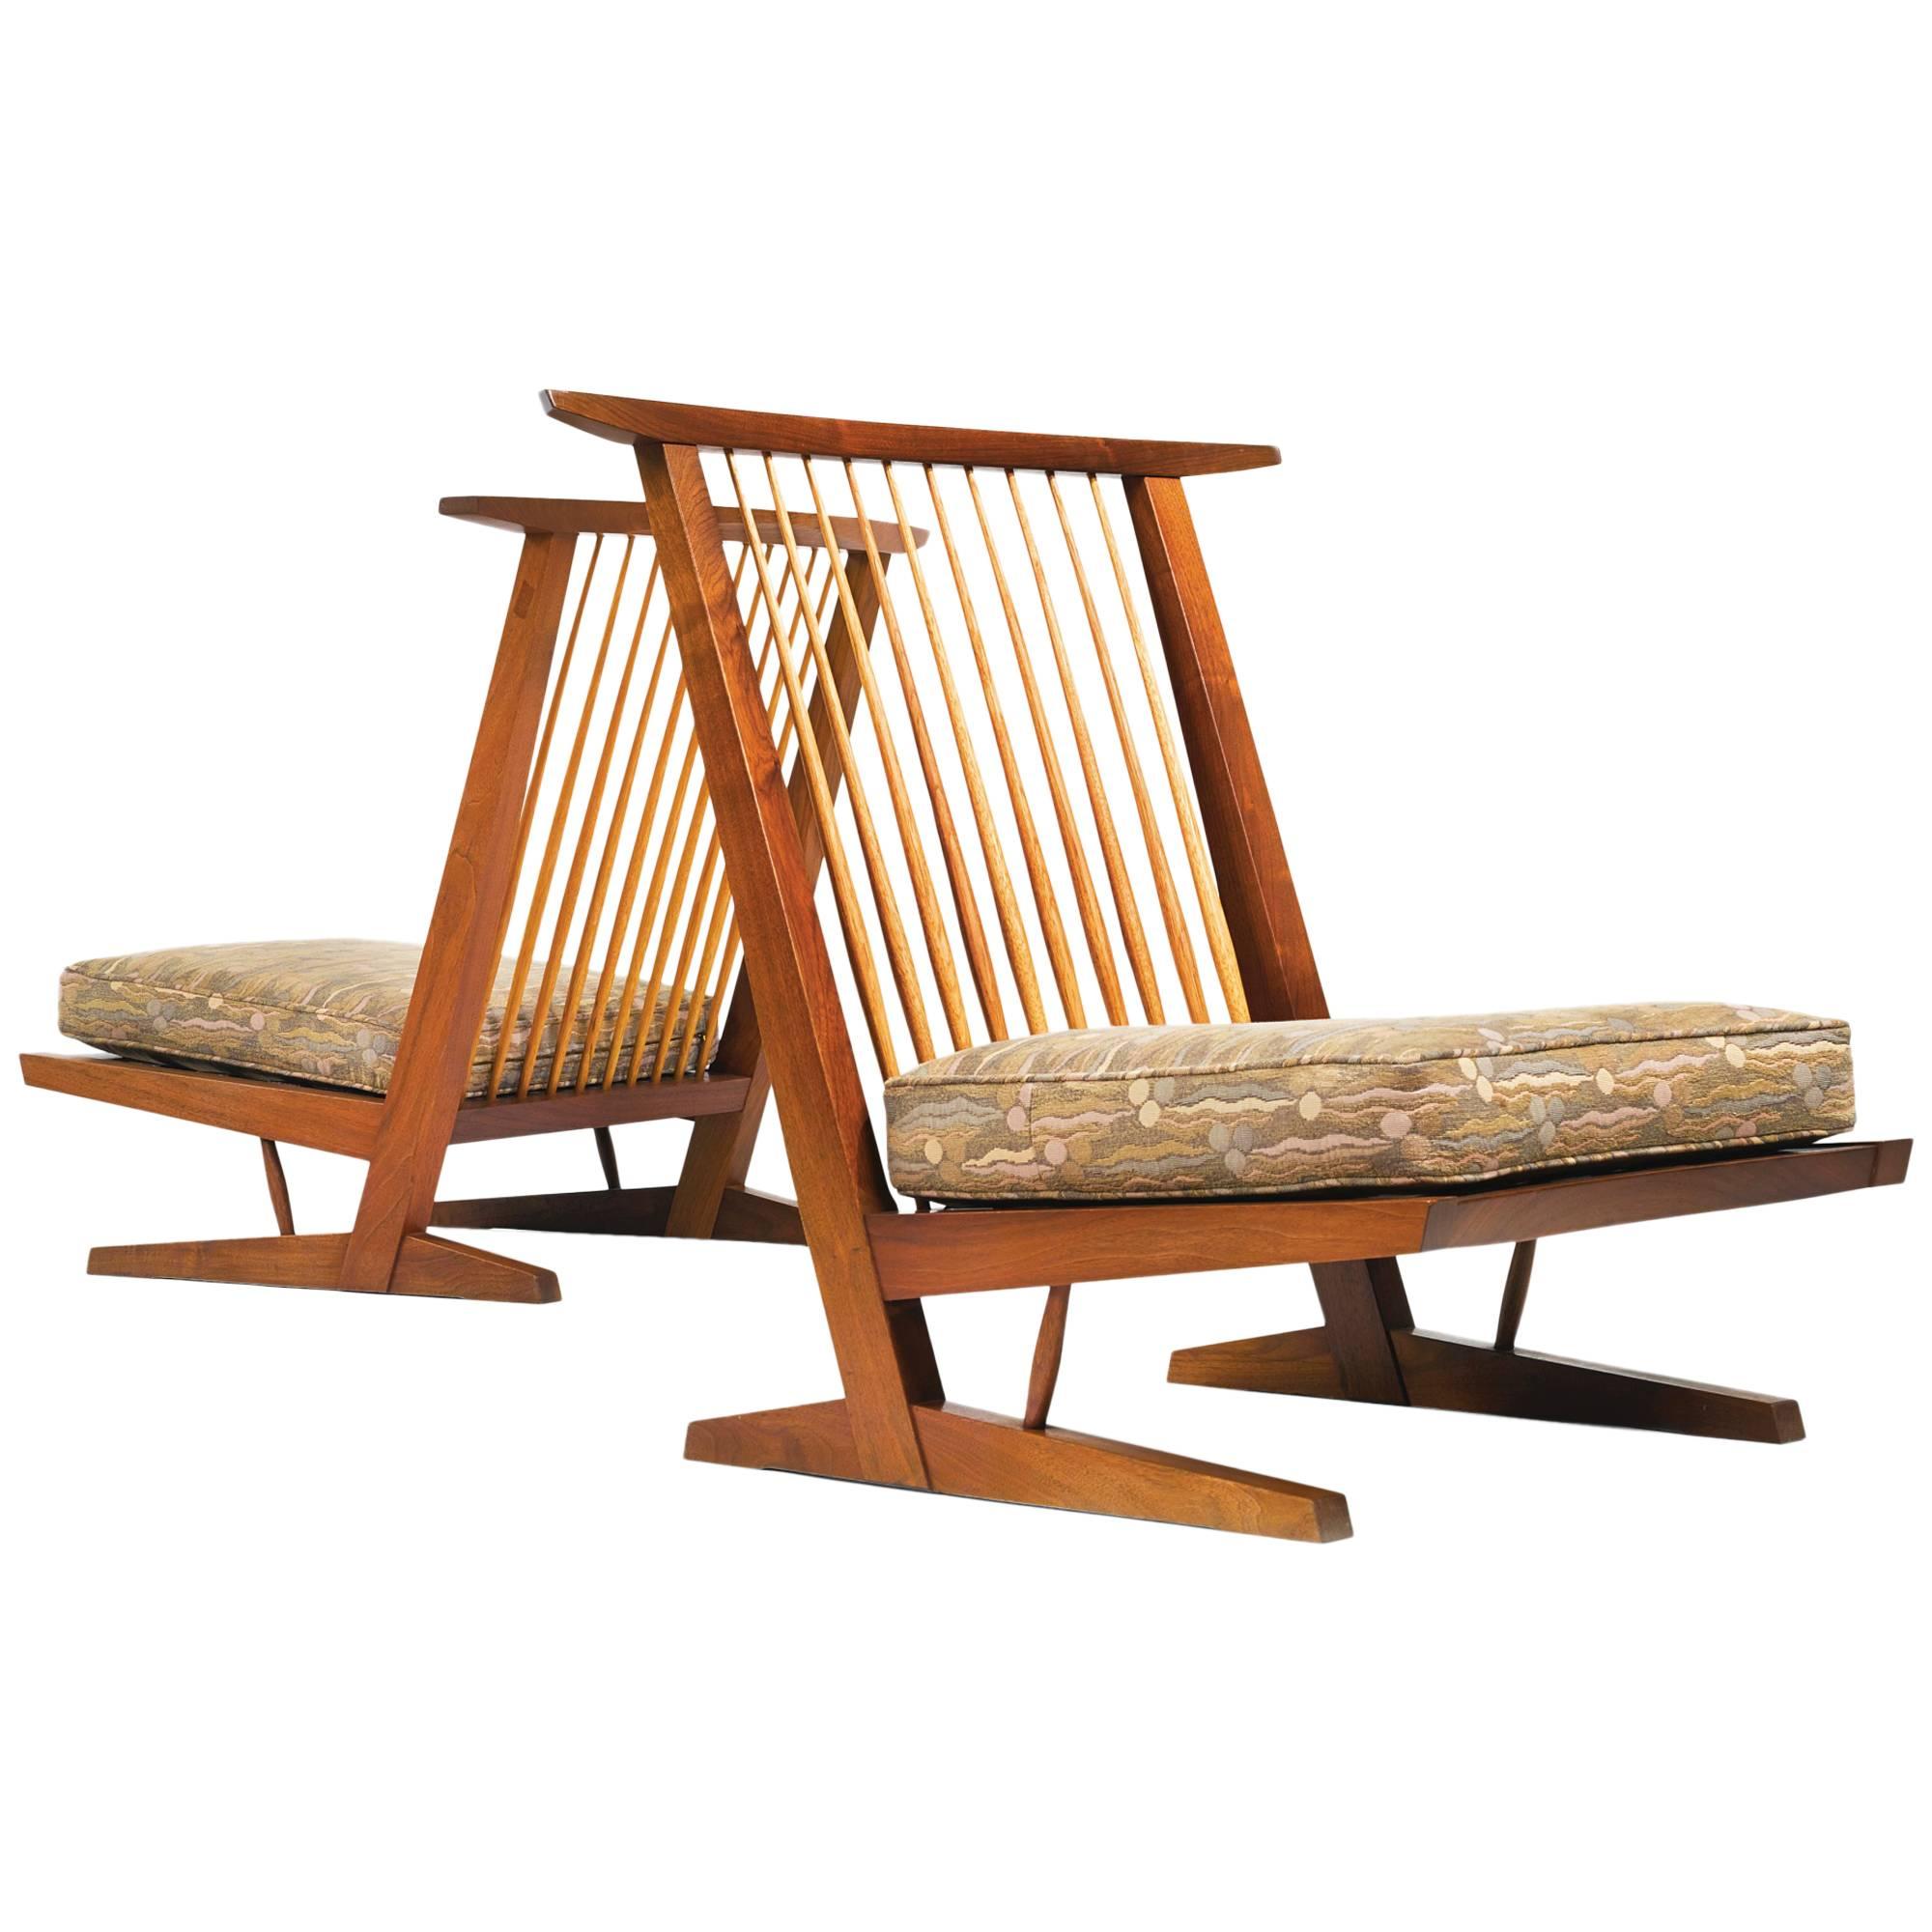 Pair of Conoid Cushion Chairs by George Nakashima, 1983 For Sale